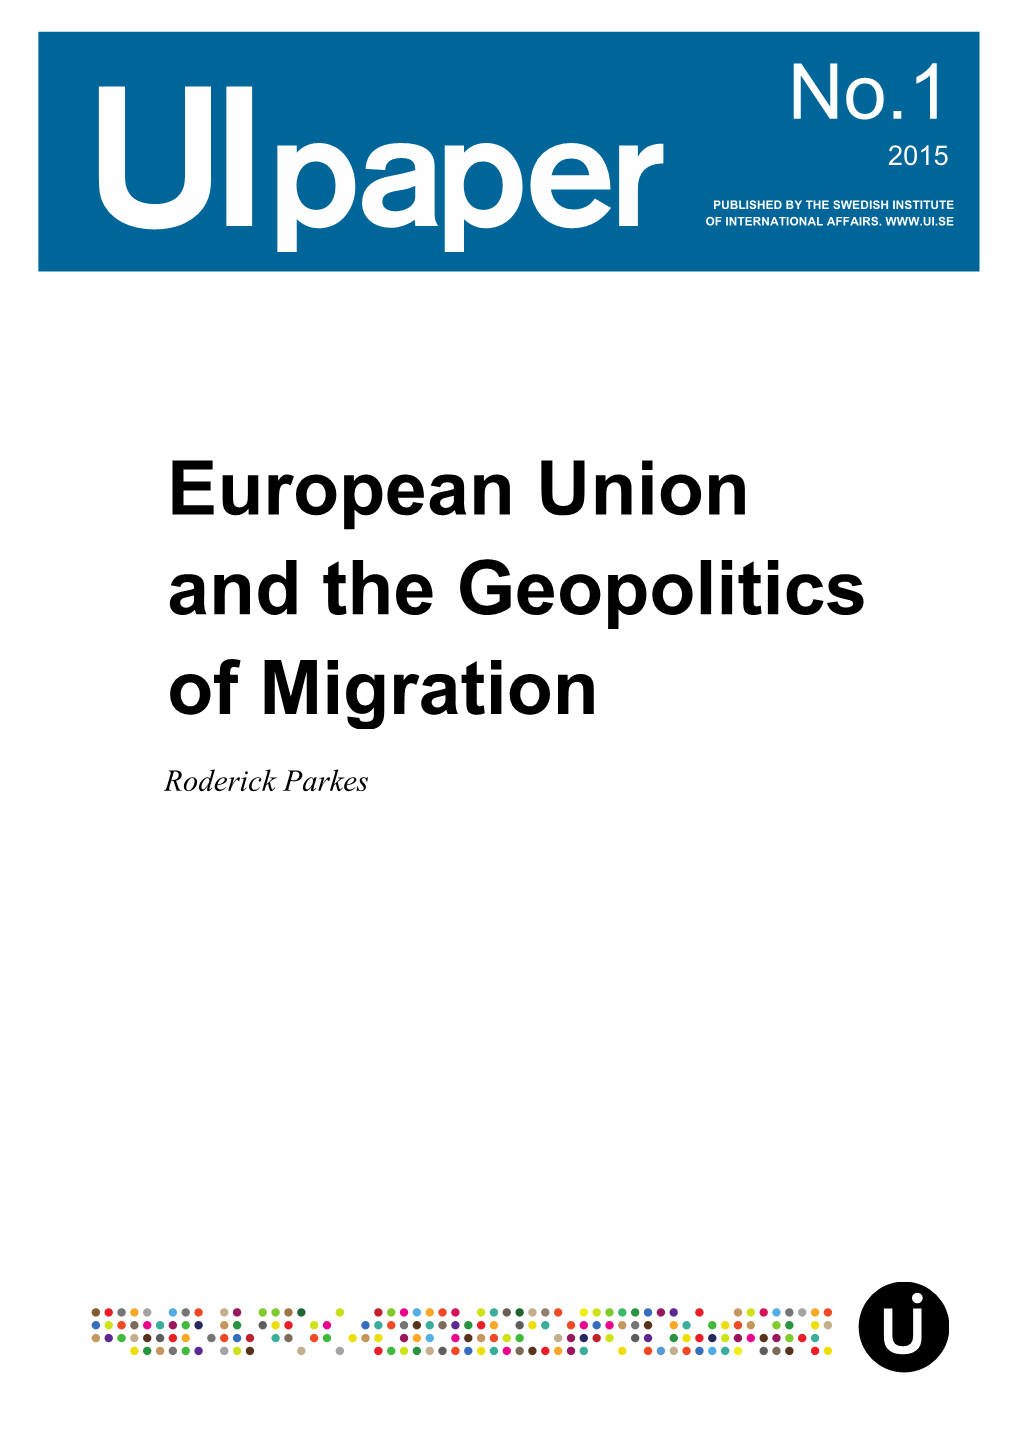 European Union and the Geopolitics of Migration"